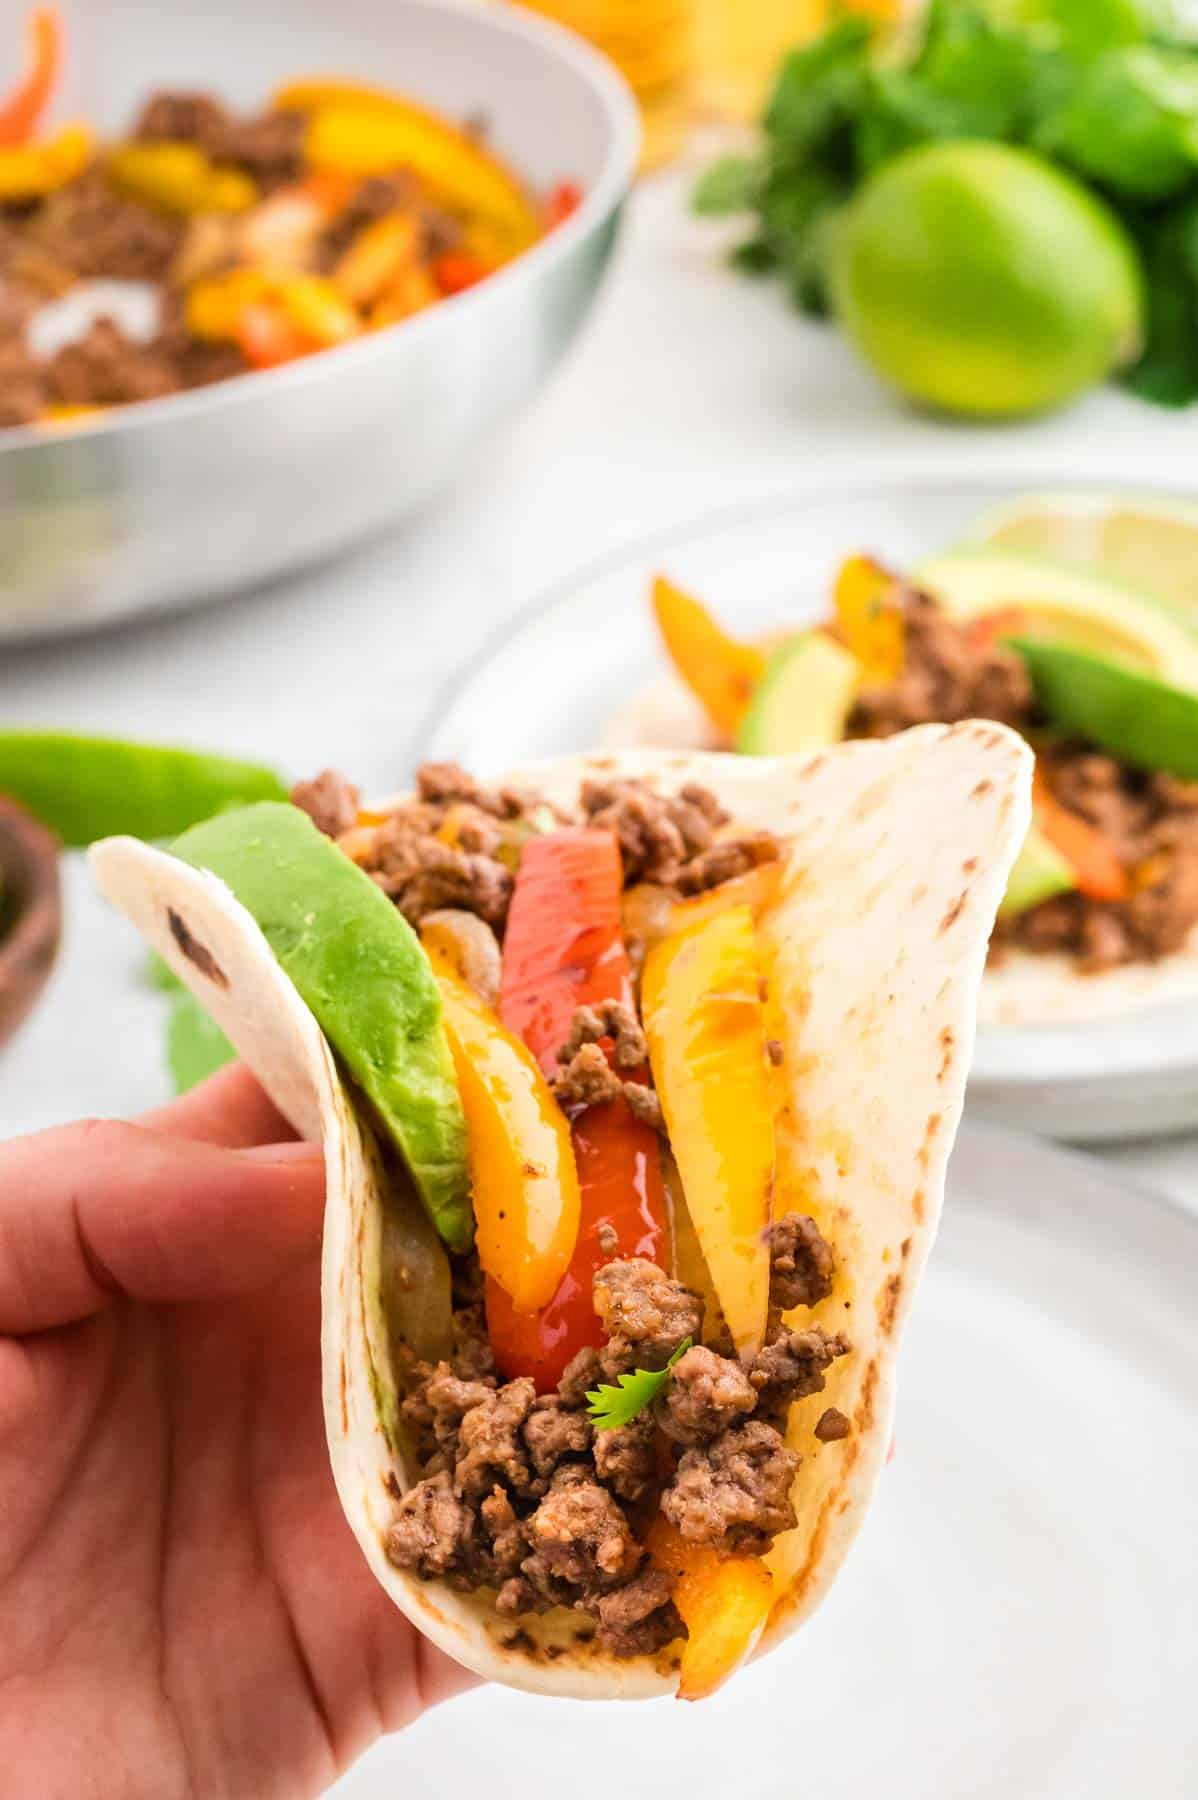 Ground Beef Fajitas are a simple weeknight meal with cooked ground beef, bell peppers and onions all seasoned with a homemade fajita spice blend and served on flour tortillas.